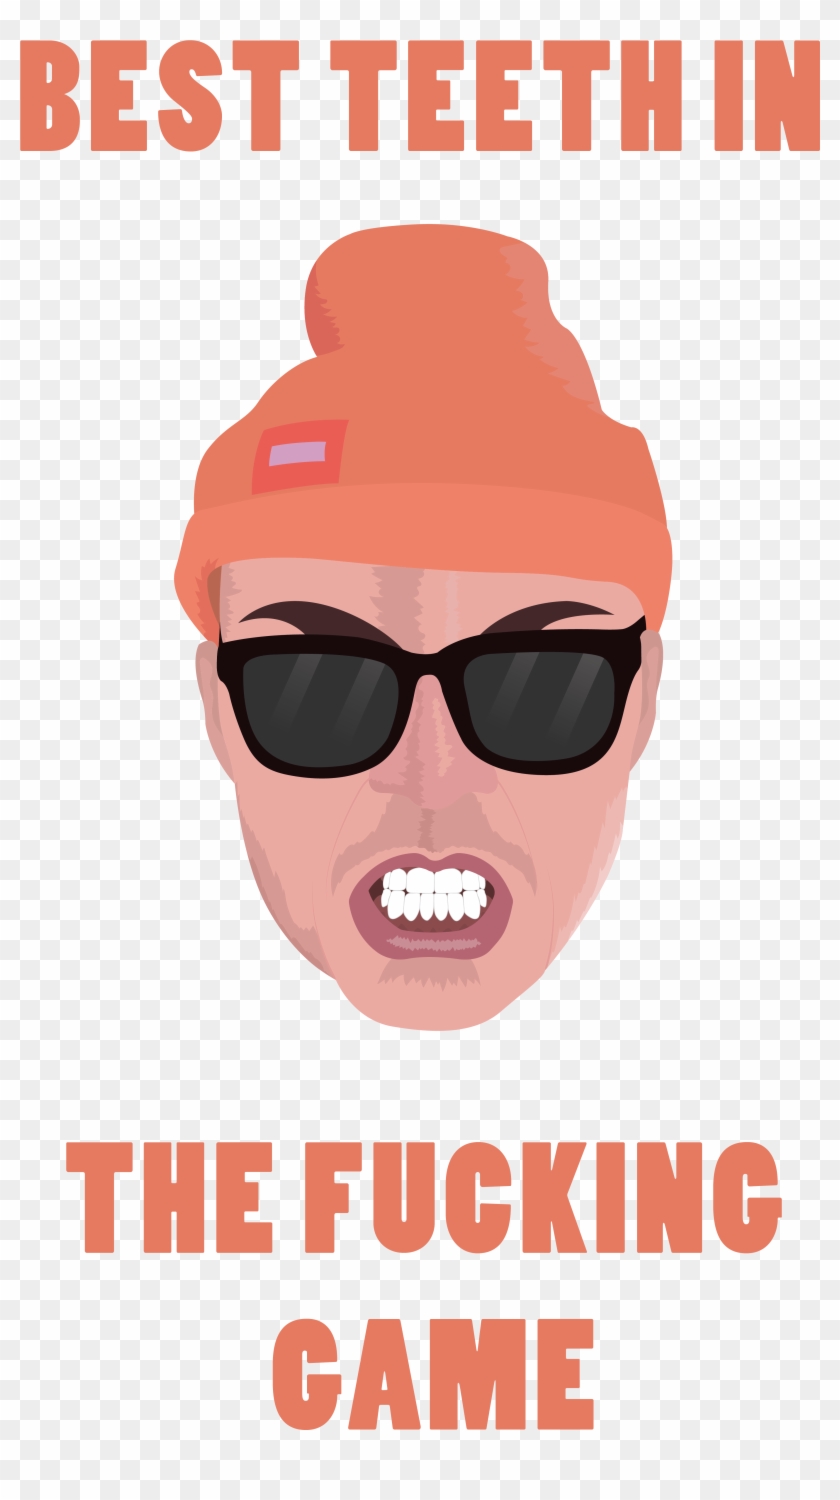 Welcome To Reddit, - Anthony Fantano Best Teeth In The Game Clipart #1615525